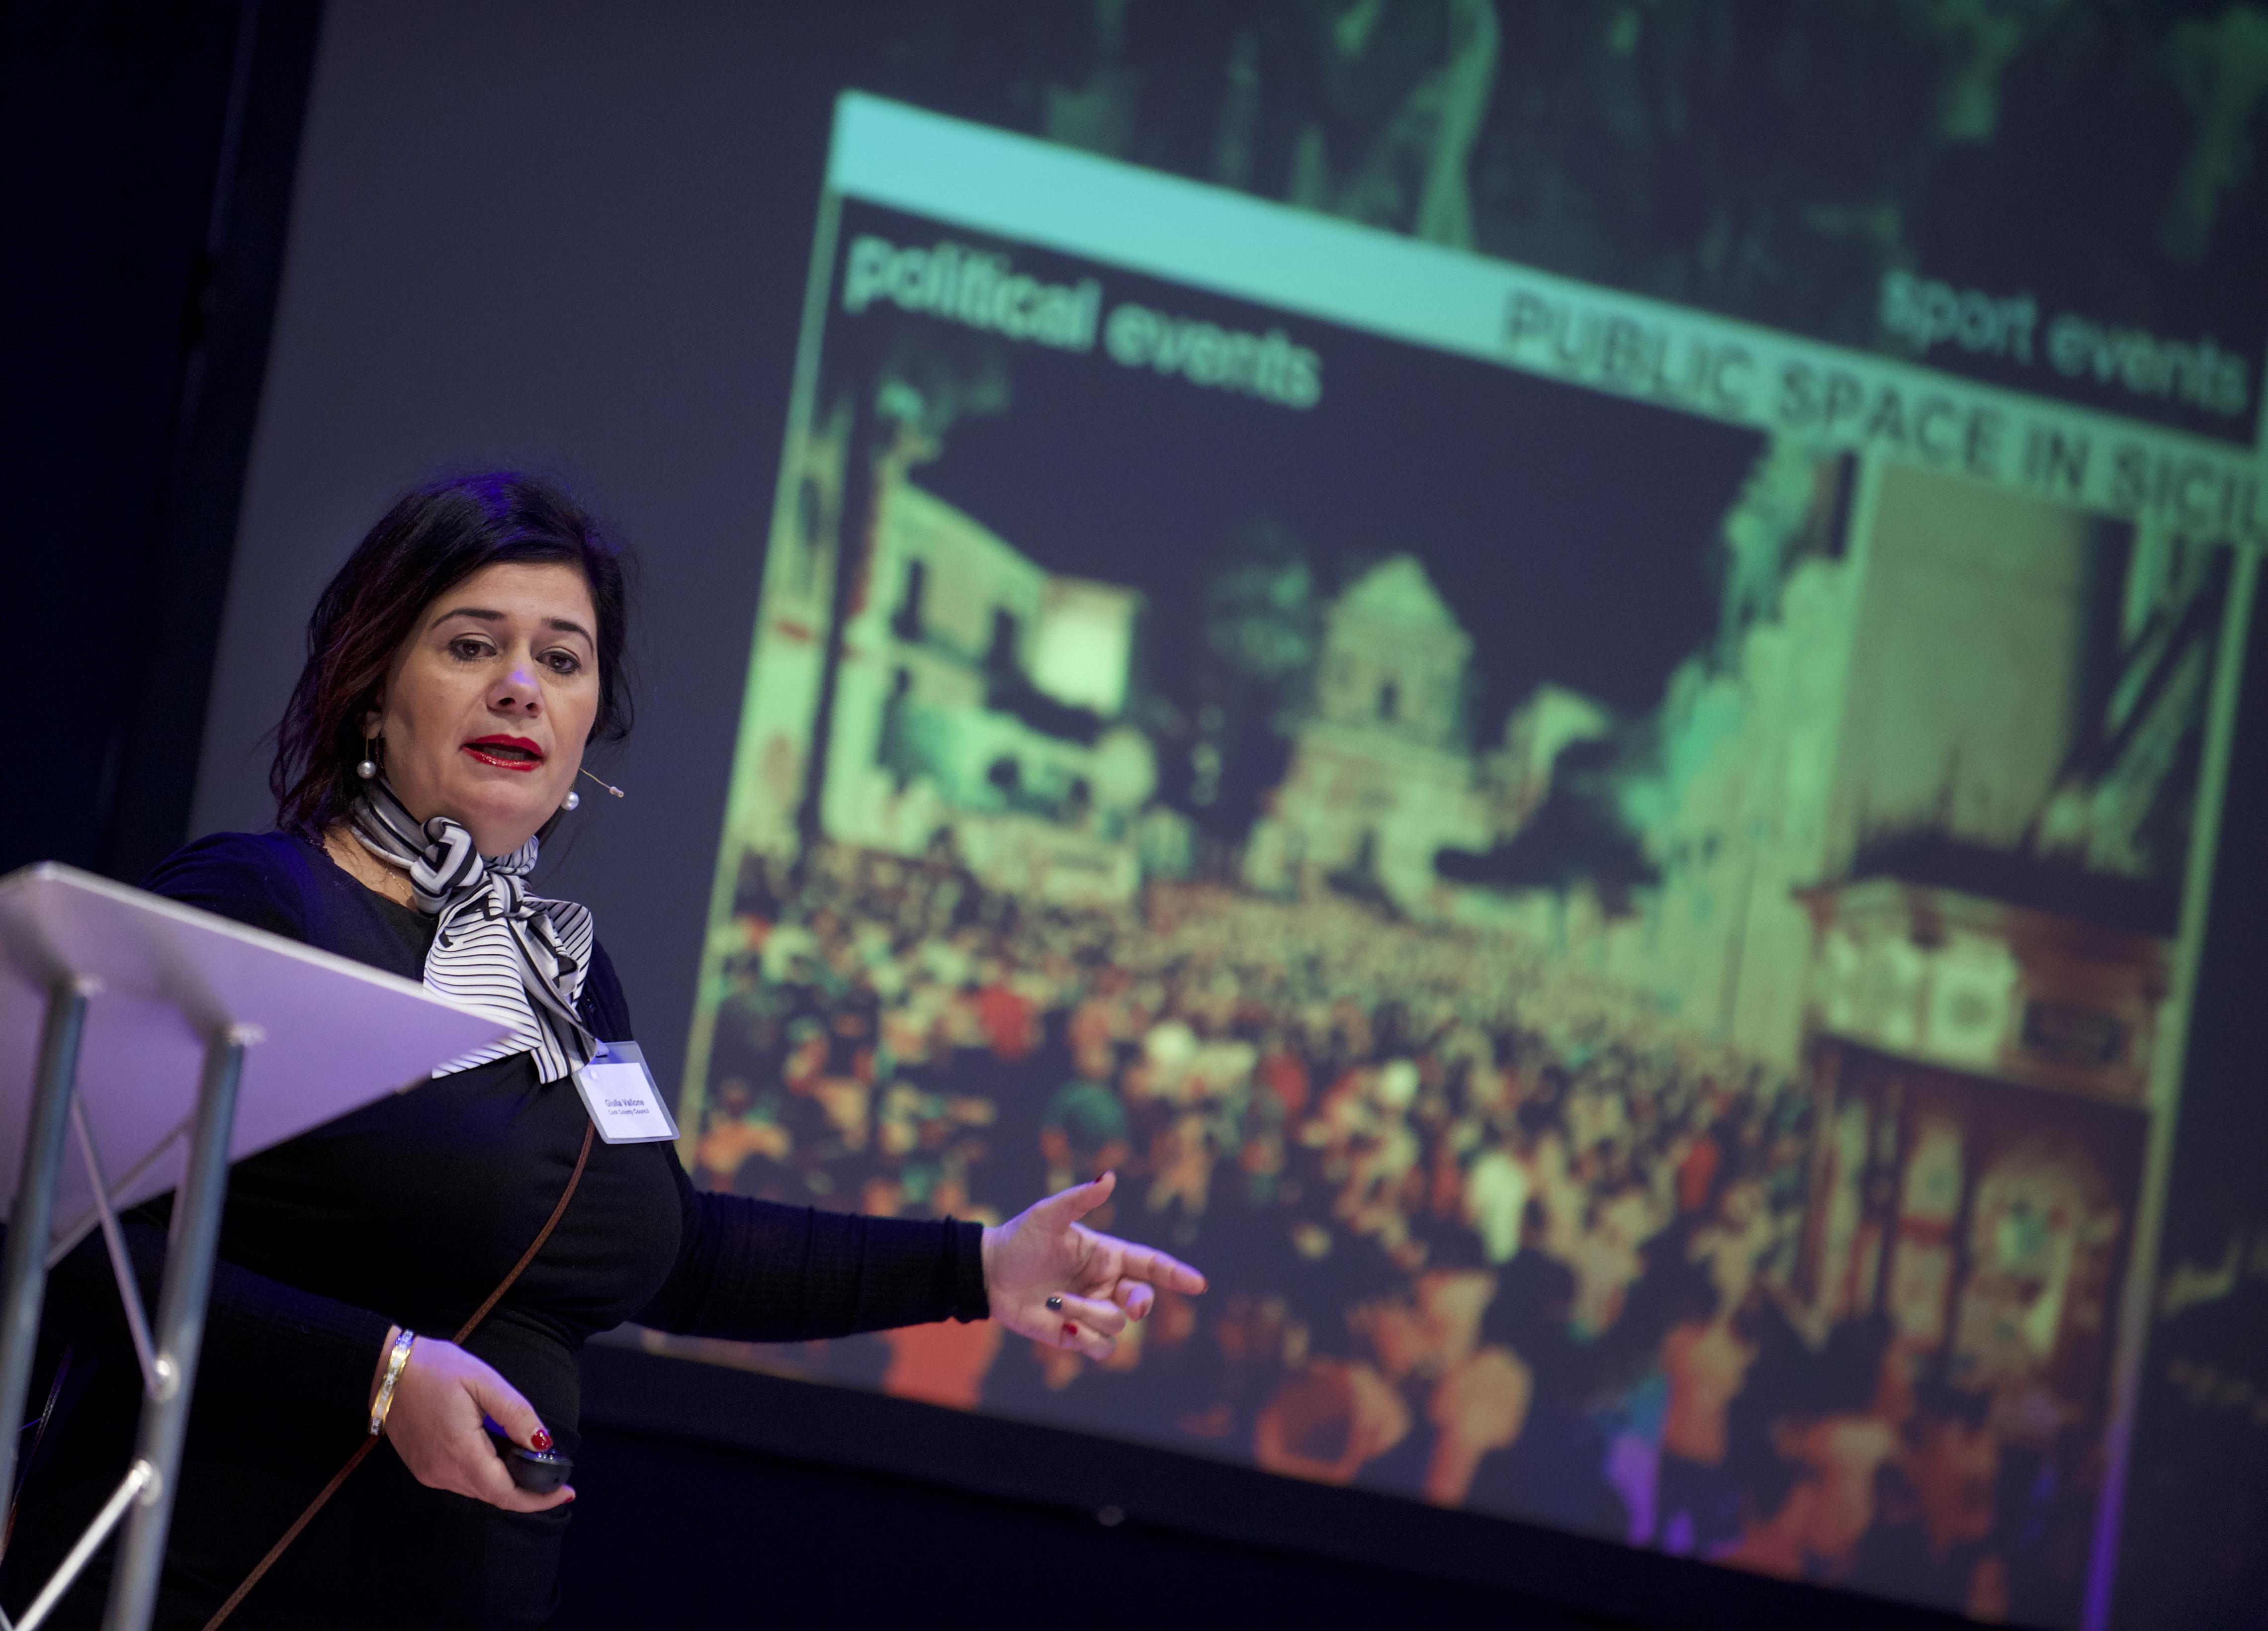 Giulia Vallone spoke at Scotland's Towns Conference, Aberdeen Music Hall.